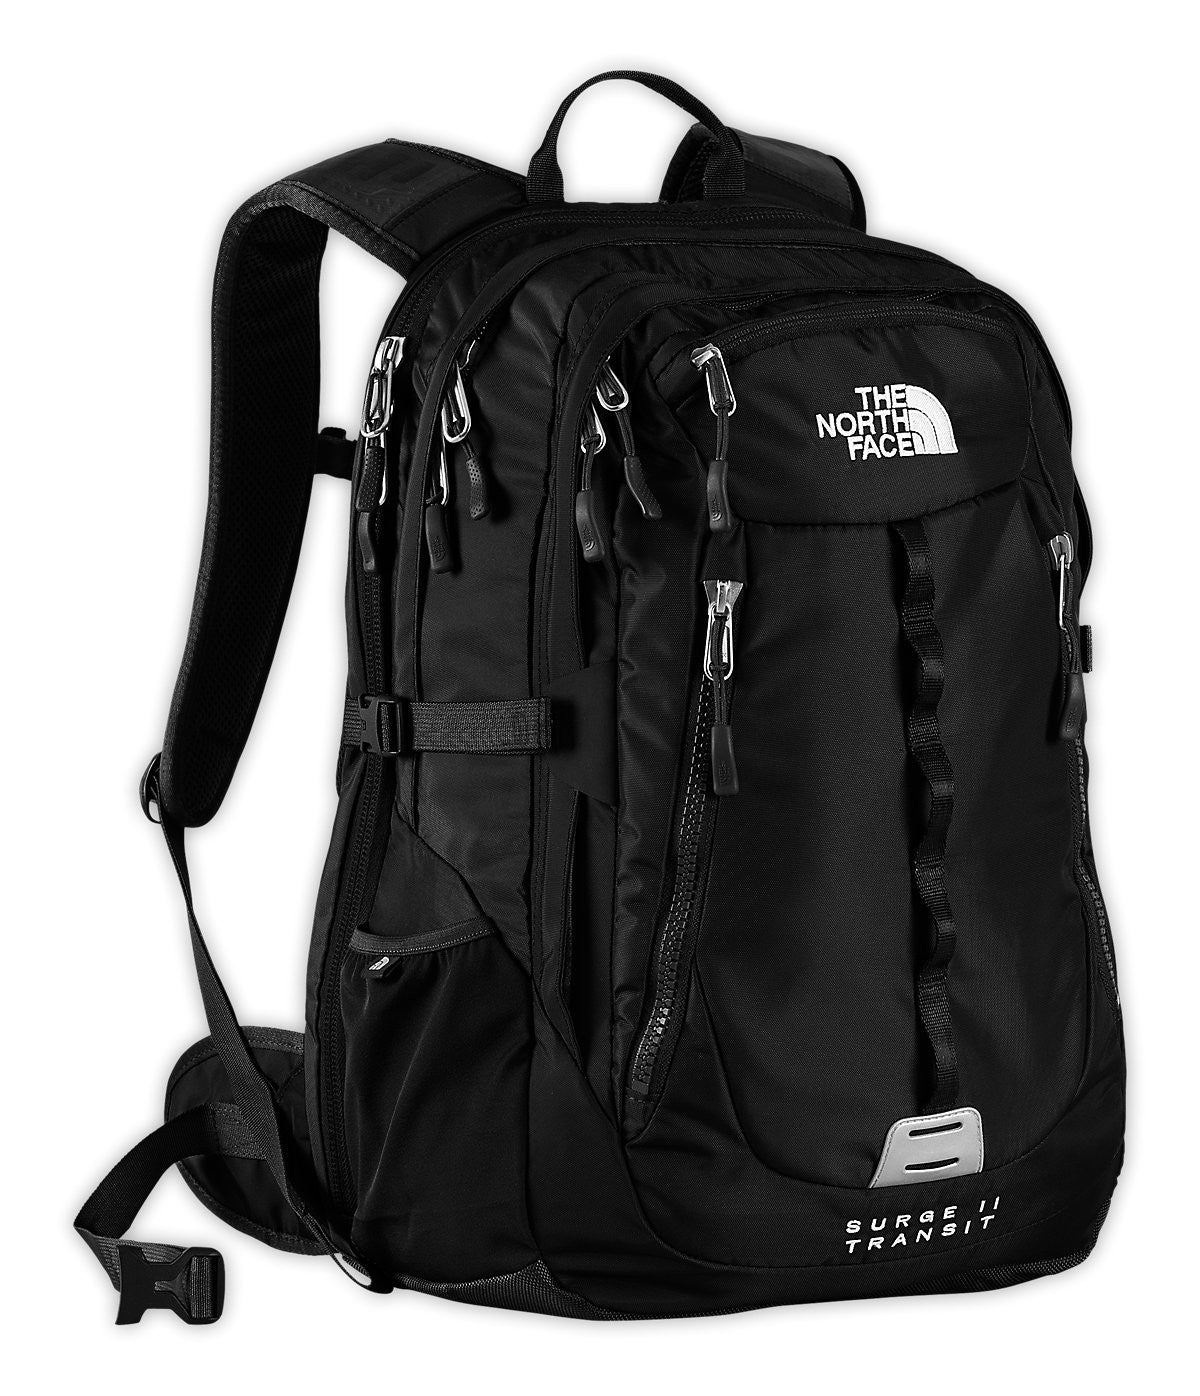 The North Face Surge II Transit – Bag4people – Superior Quality